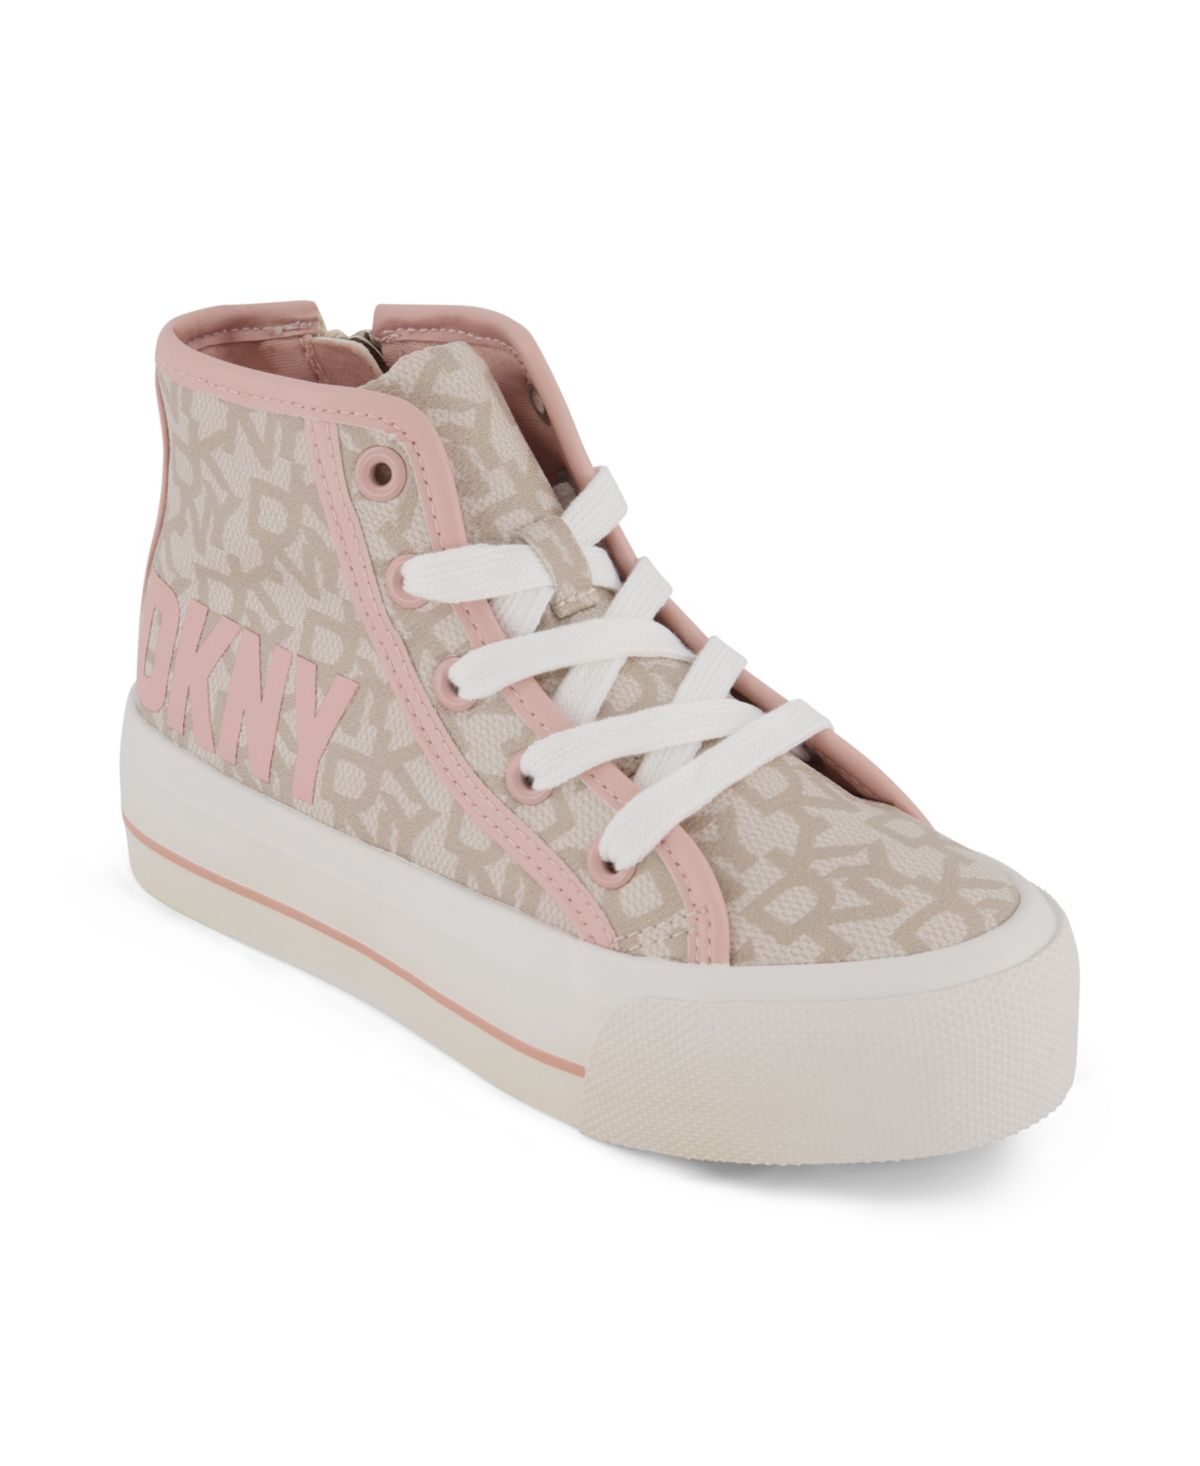 DKNY LITTLE GIRLS PLATFORM HIGH TOP LACE-UP SNEAKERS